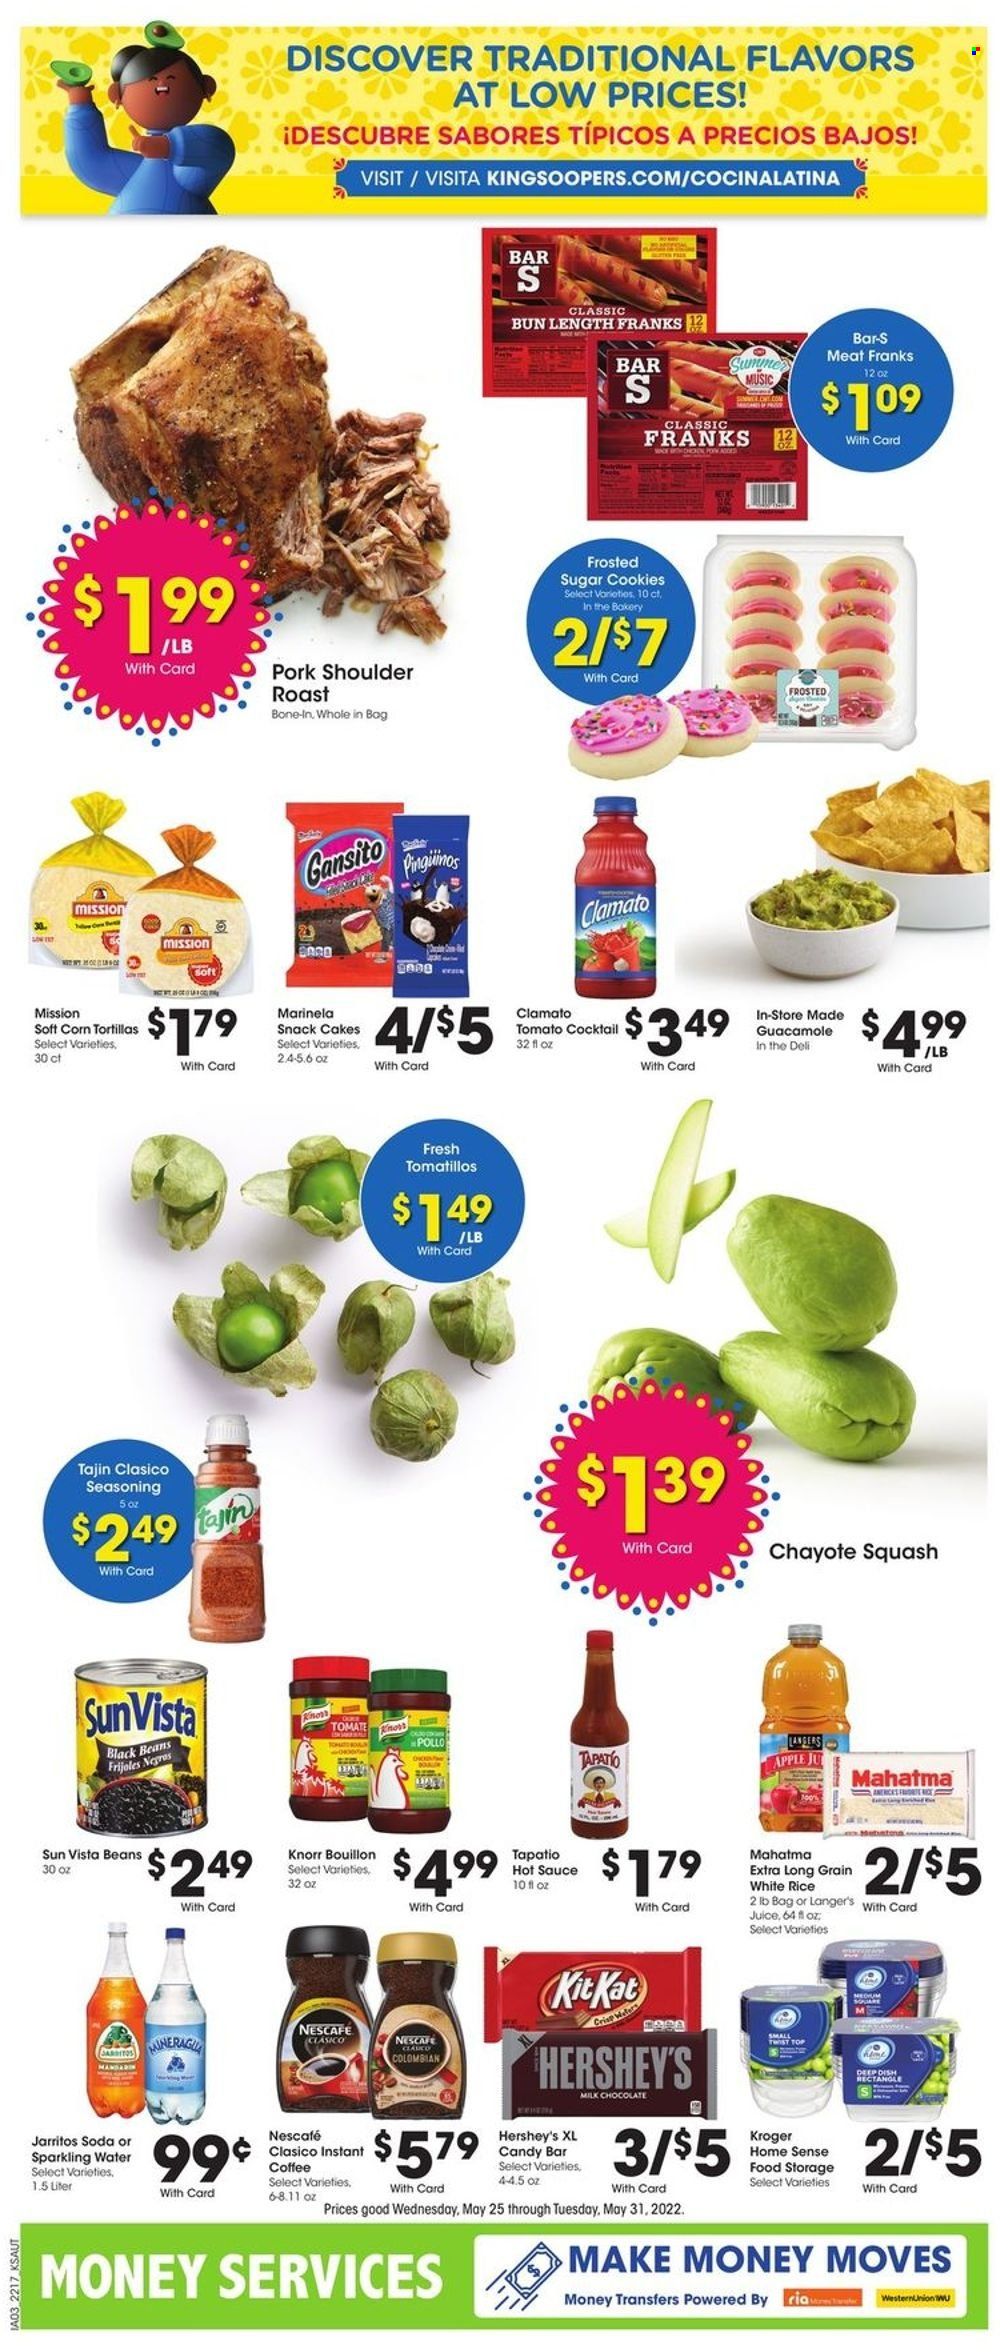 thumbnail - King Soopers Flyer - 05/25/2022 - 05/31/2022 - Sales products - Apple, corn tortillas, tortillas, cake, tomatillo, chayote squash, chayote, Knorr, sauce, guacamole, Hershey's, cookies, milk chocolate, chocolate, snack, KitKat, bouillon, black beans, rice, white rice, spice, hot sauce, juice, Clamato, soda, sparkling water, instant coffee, Nescafé, pork meat, pork roast, pork shoulder. Page 9.